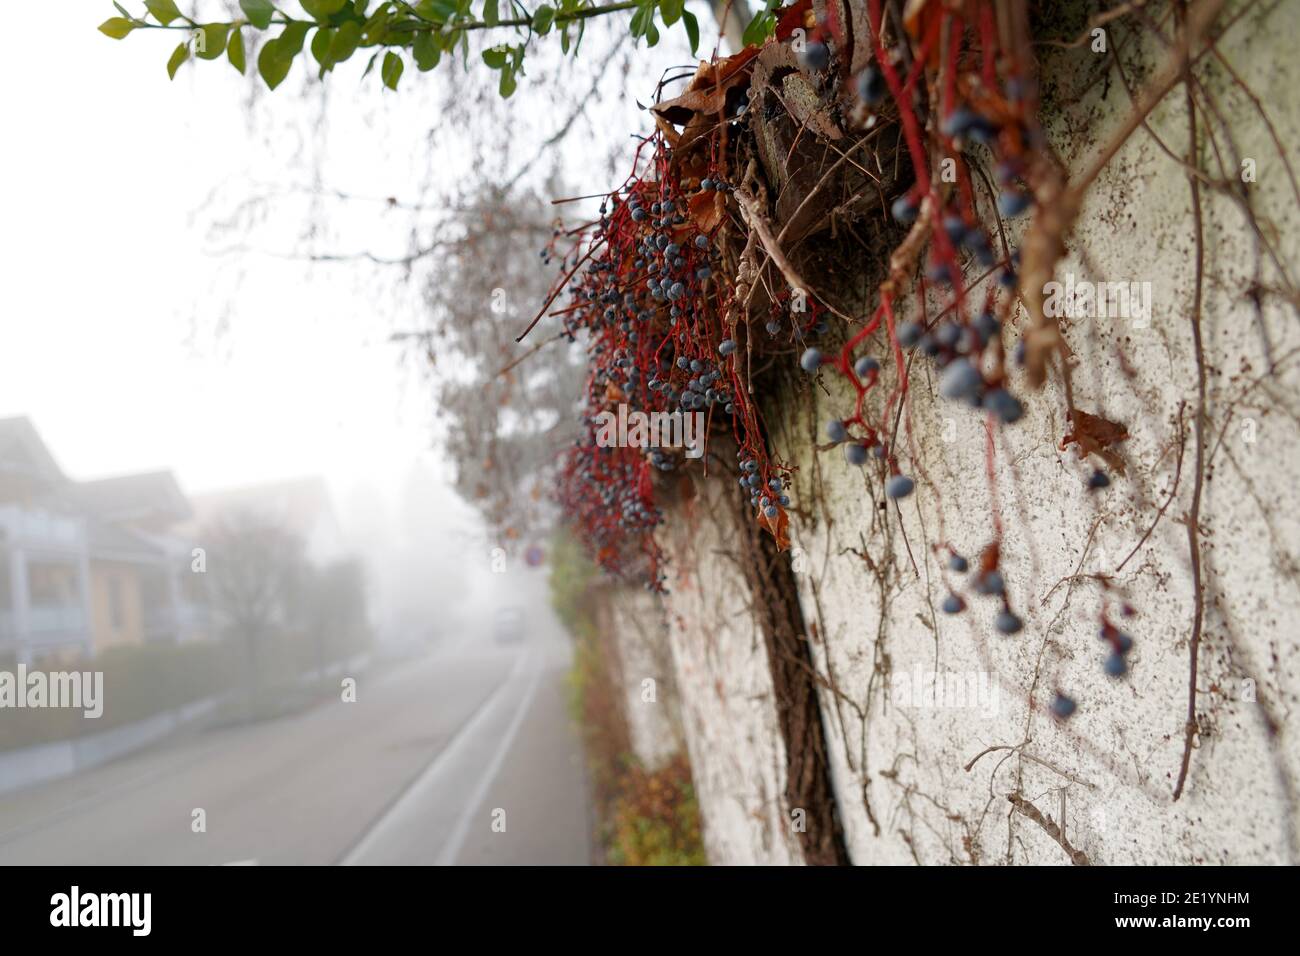 Street on a winter day in mist, with a detail of a wall partly covered with Boston ivy, in Latin Parthenocissus tricuspidata, with dry fruits on it. Stock Photo